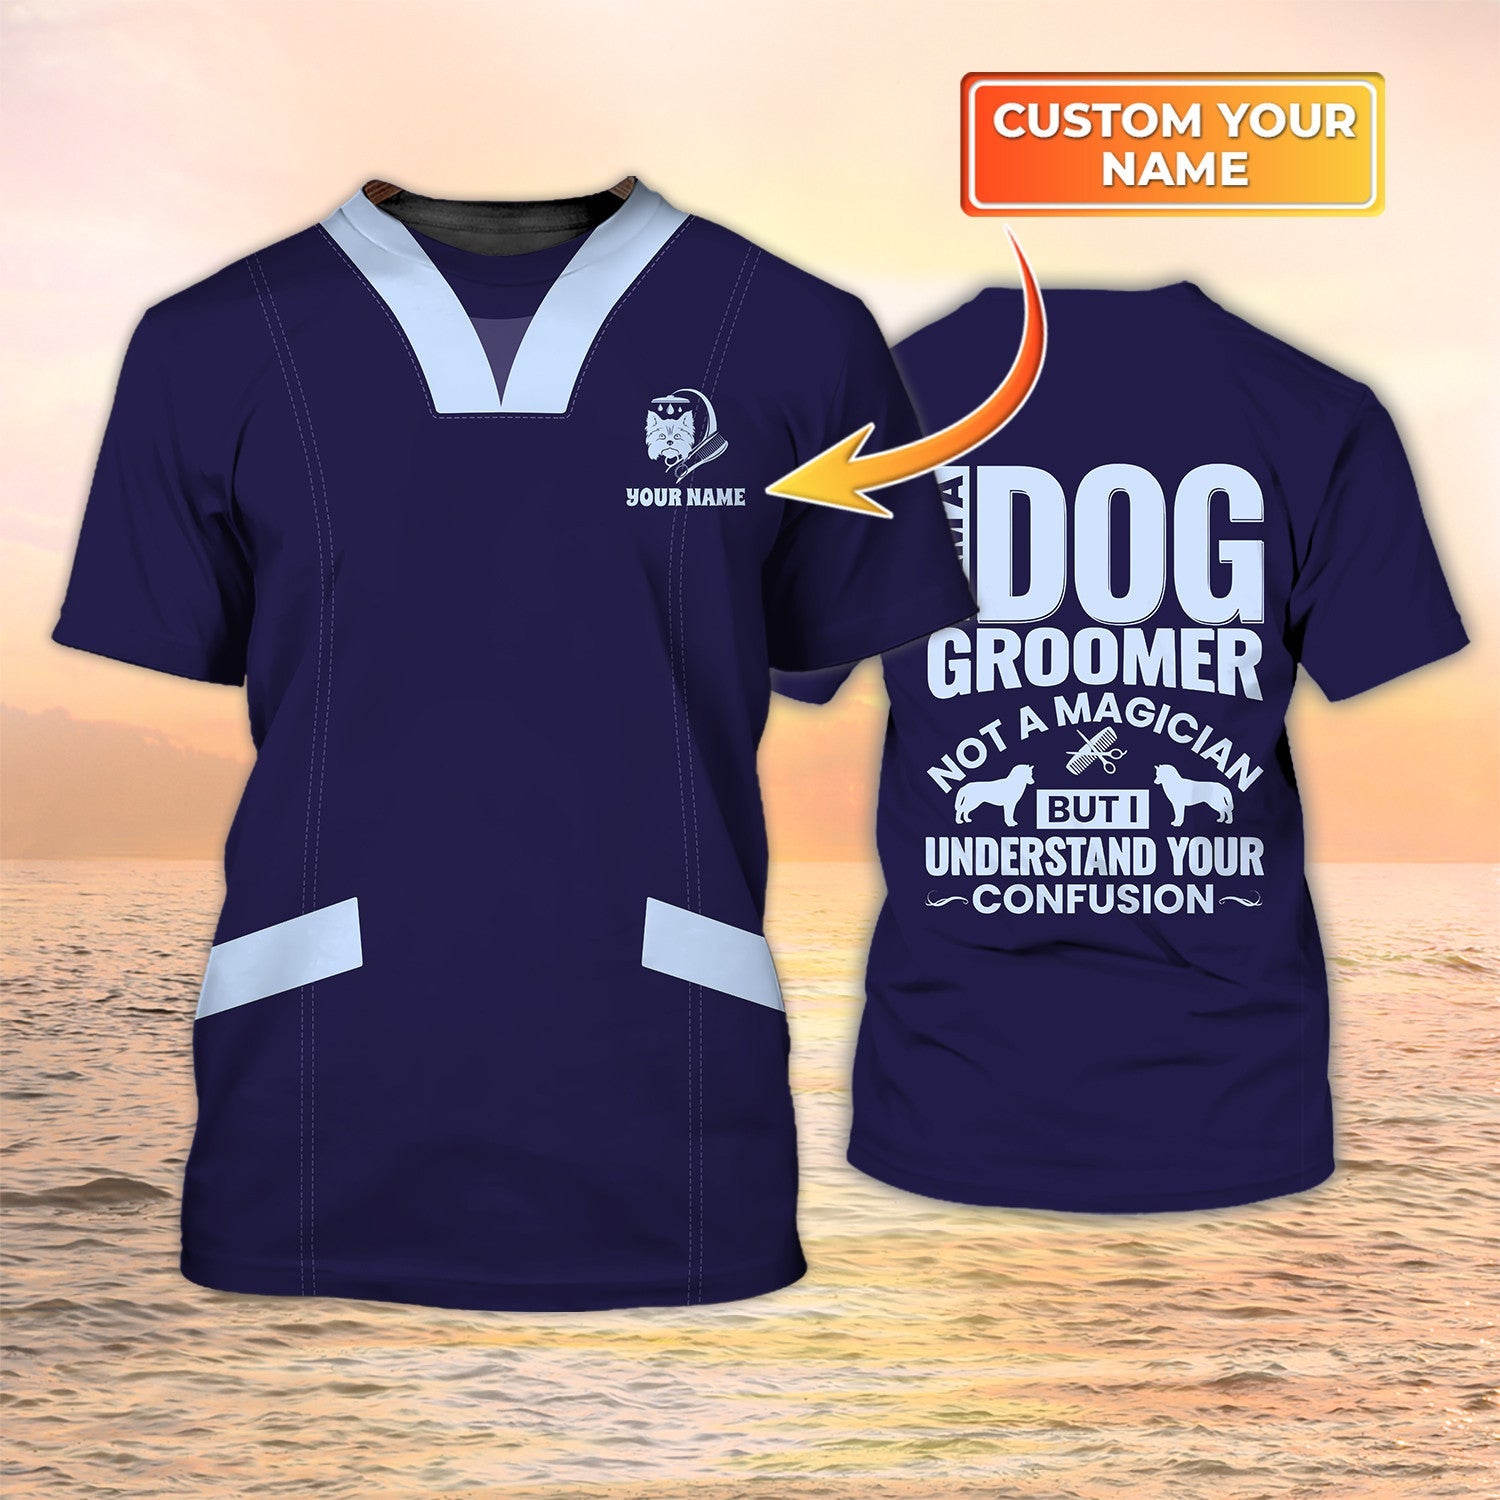 Personalized 3D All Over Printed Dog Groomer Shirt Grooming Uniform I Am A Dog Groomer Not A Magician